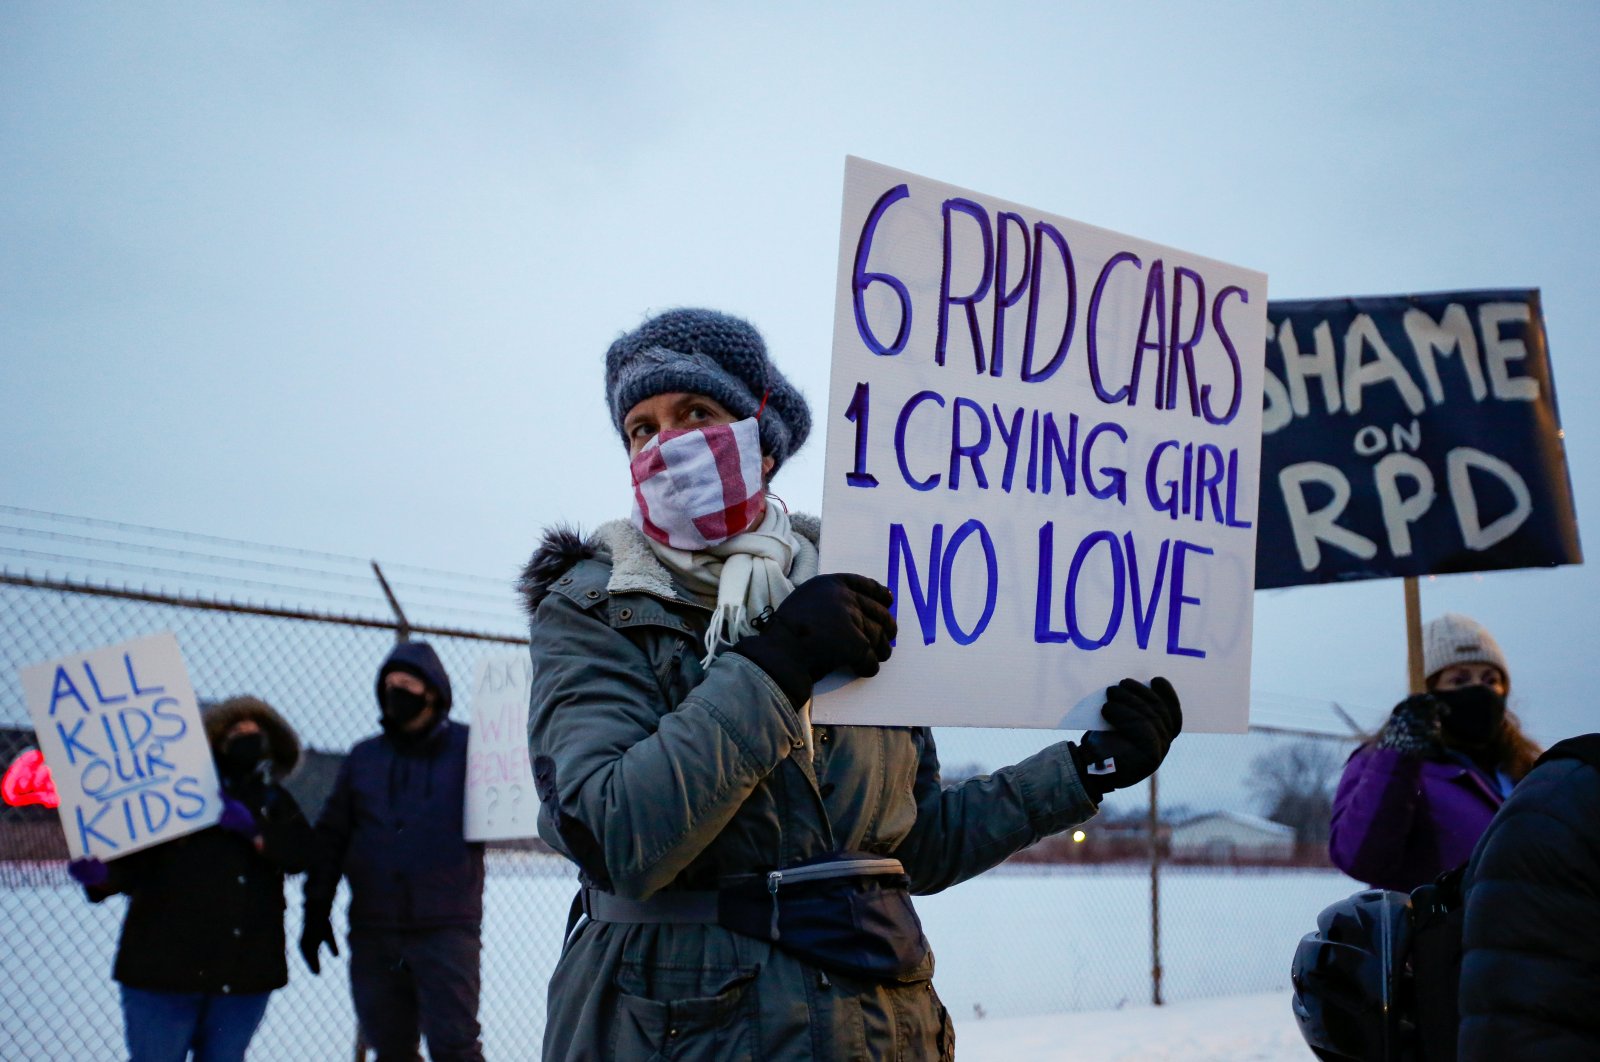 People protest the police's use of excessive force after a nine-year-old girl was handcuffed and sprayed with a chemical irritant in Rochester, New York, U.S., Feb. 1, 2021. (Reuters Photo)